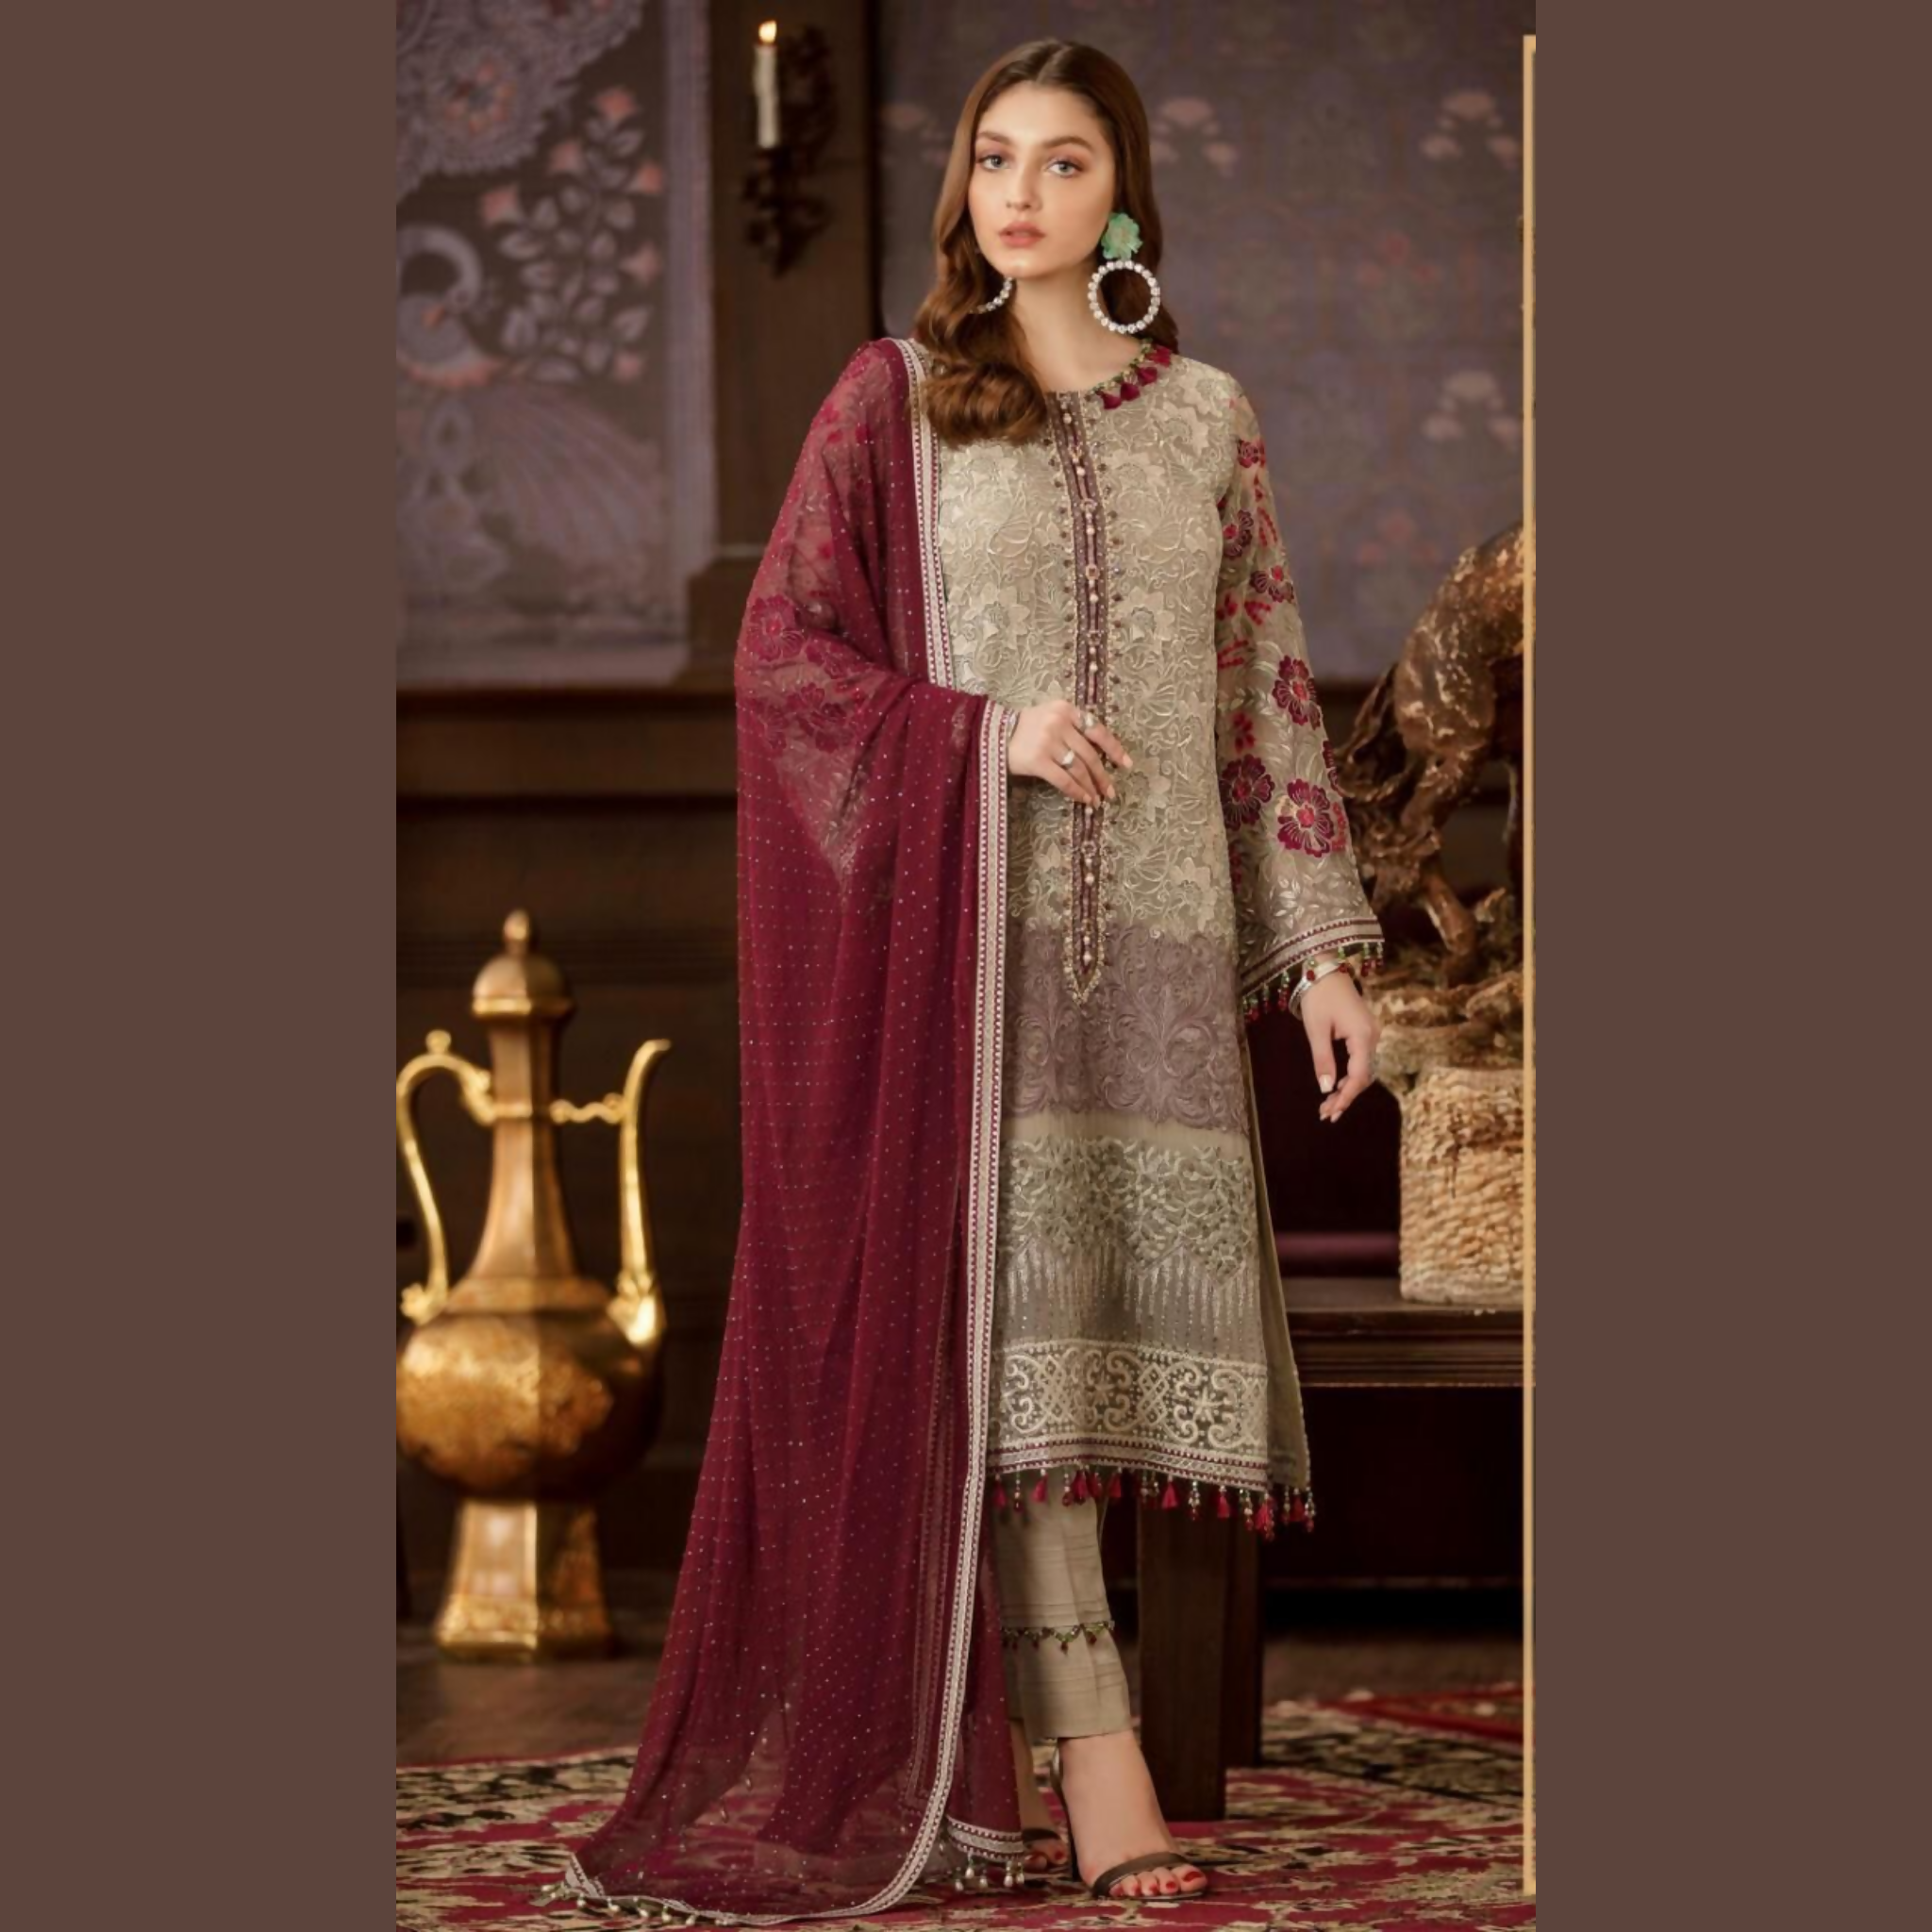 Unstitched Suit, Exquisite Chiffon Embroidery Collection, Flossie Festive, for Ladies